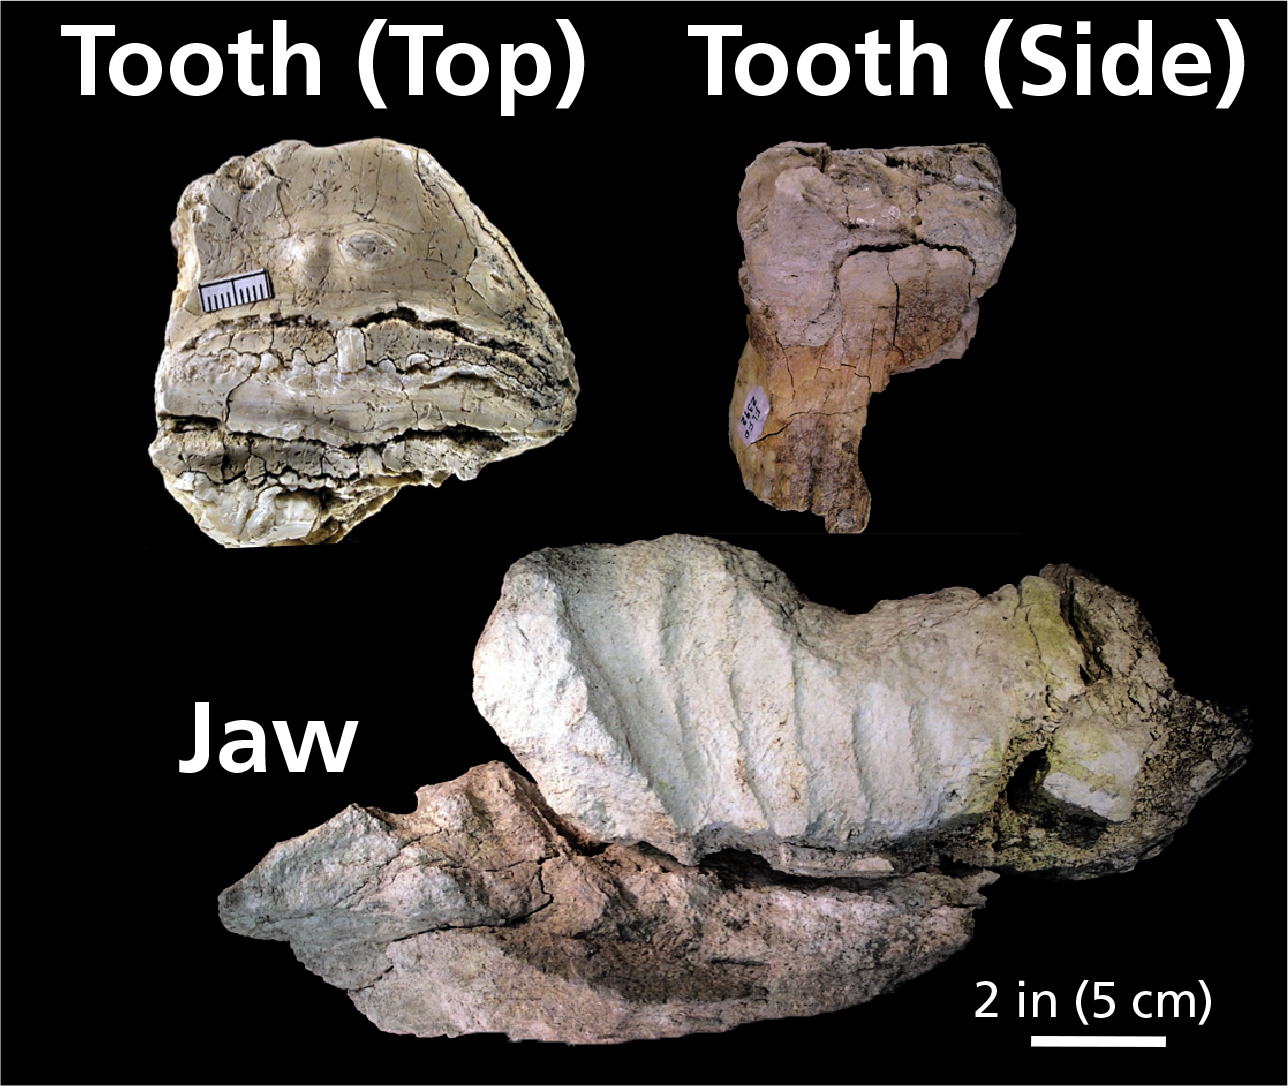 Fossilized fragments of mammoth jaw and tooth found at the monument on black background.